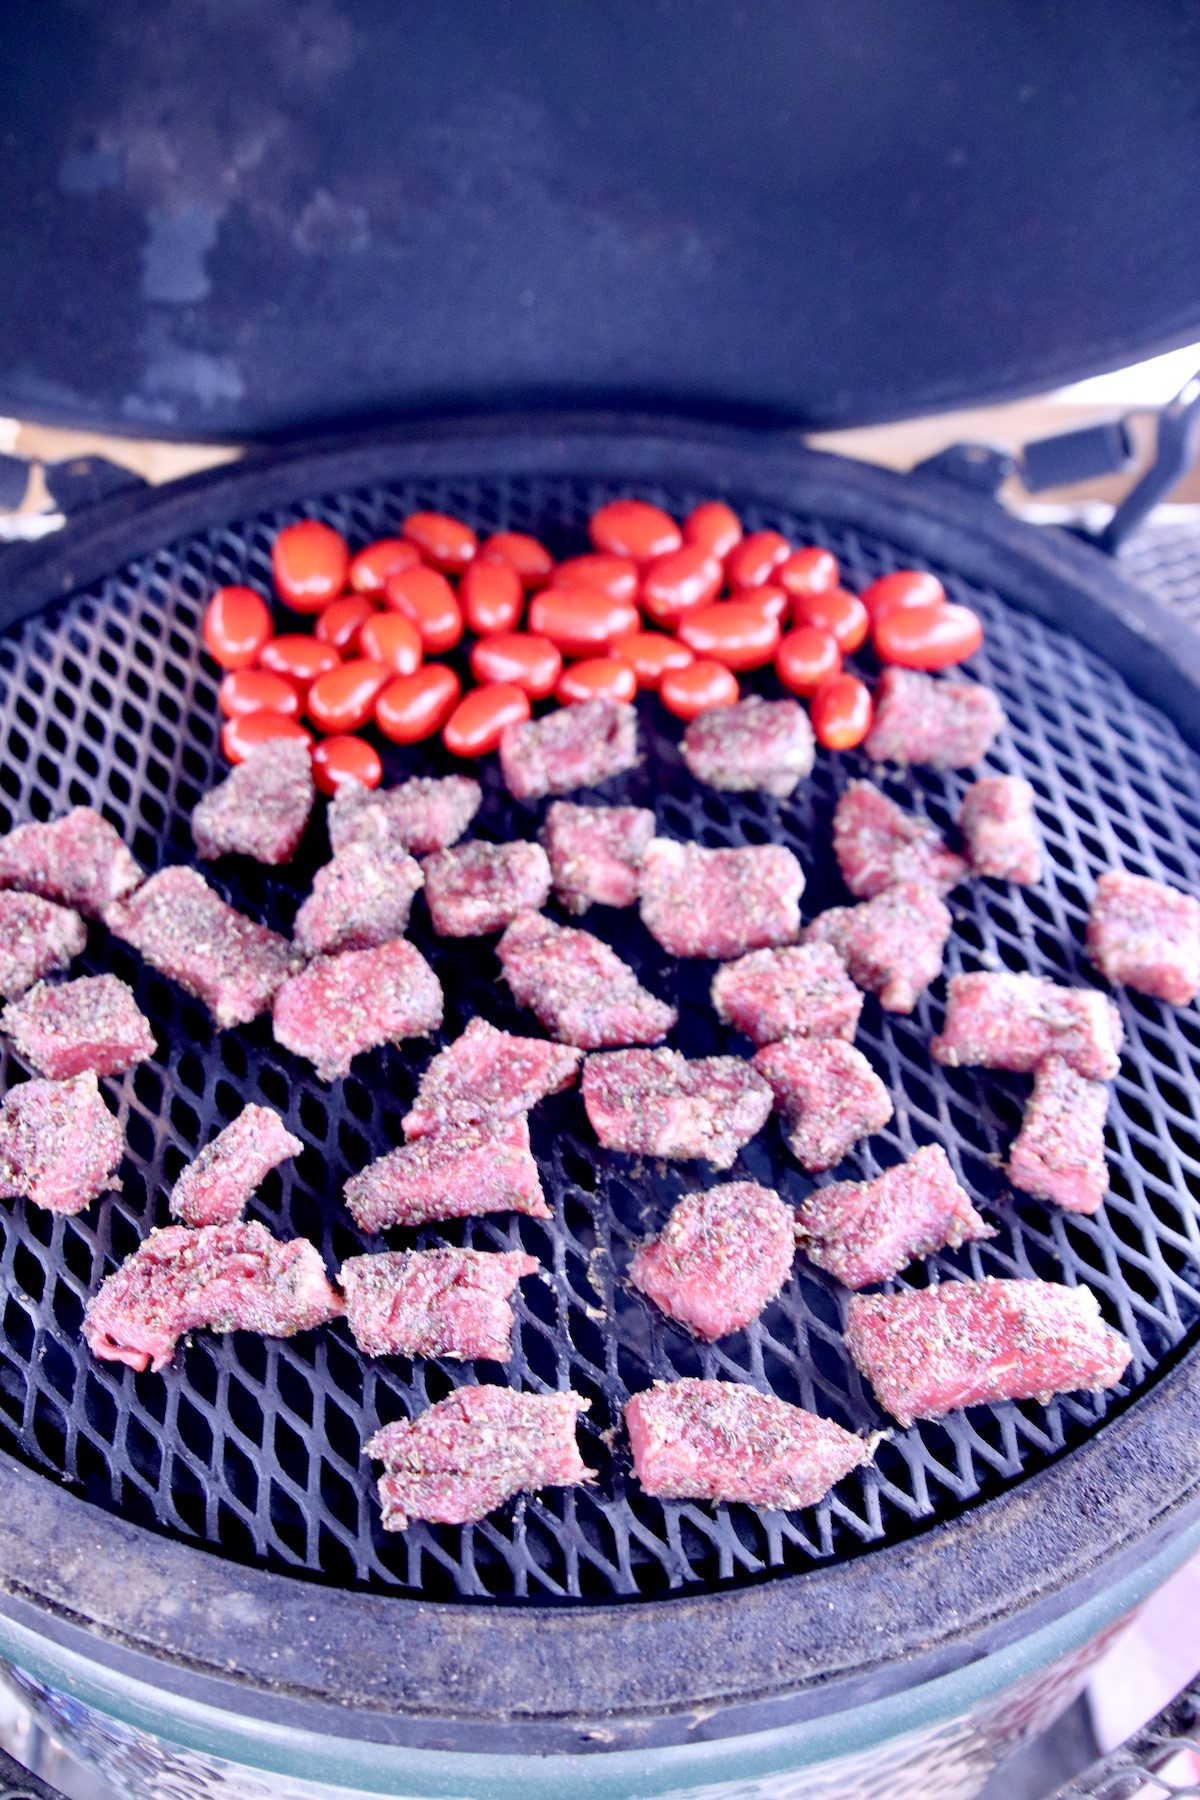 grape tomatoes and steak bites on grill